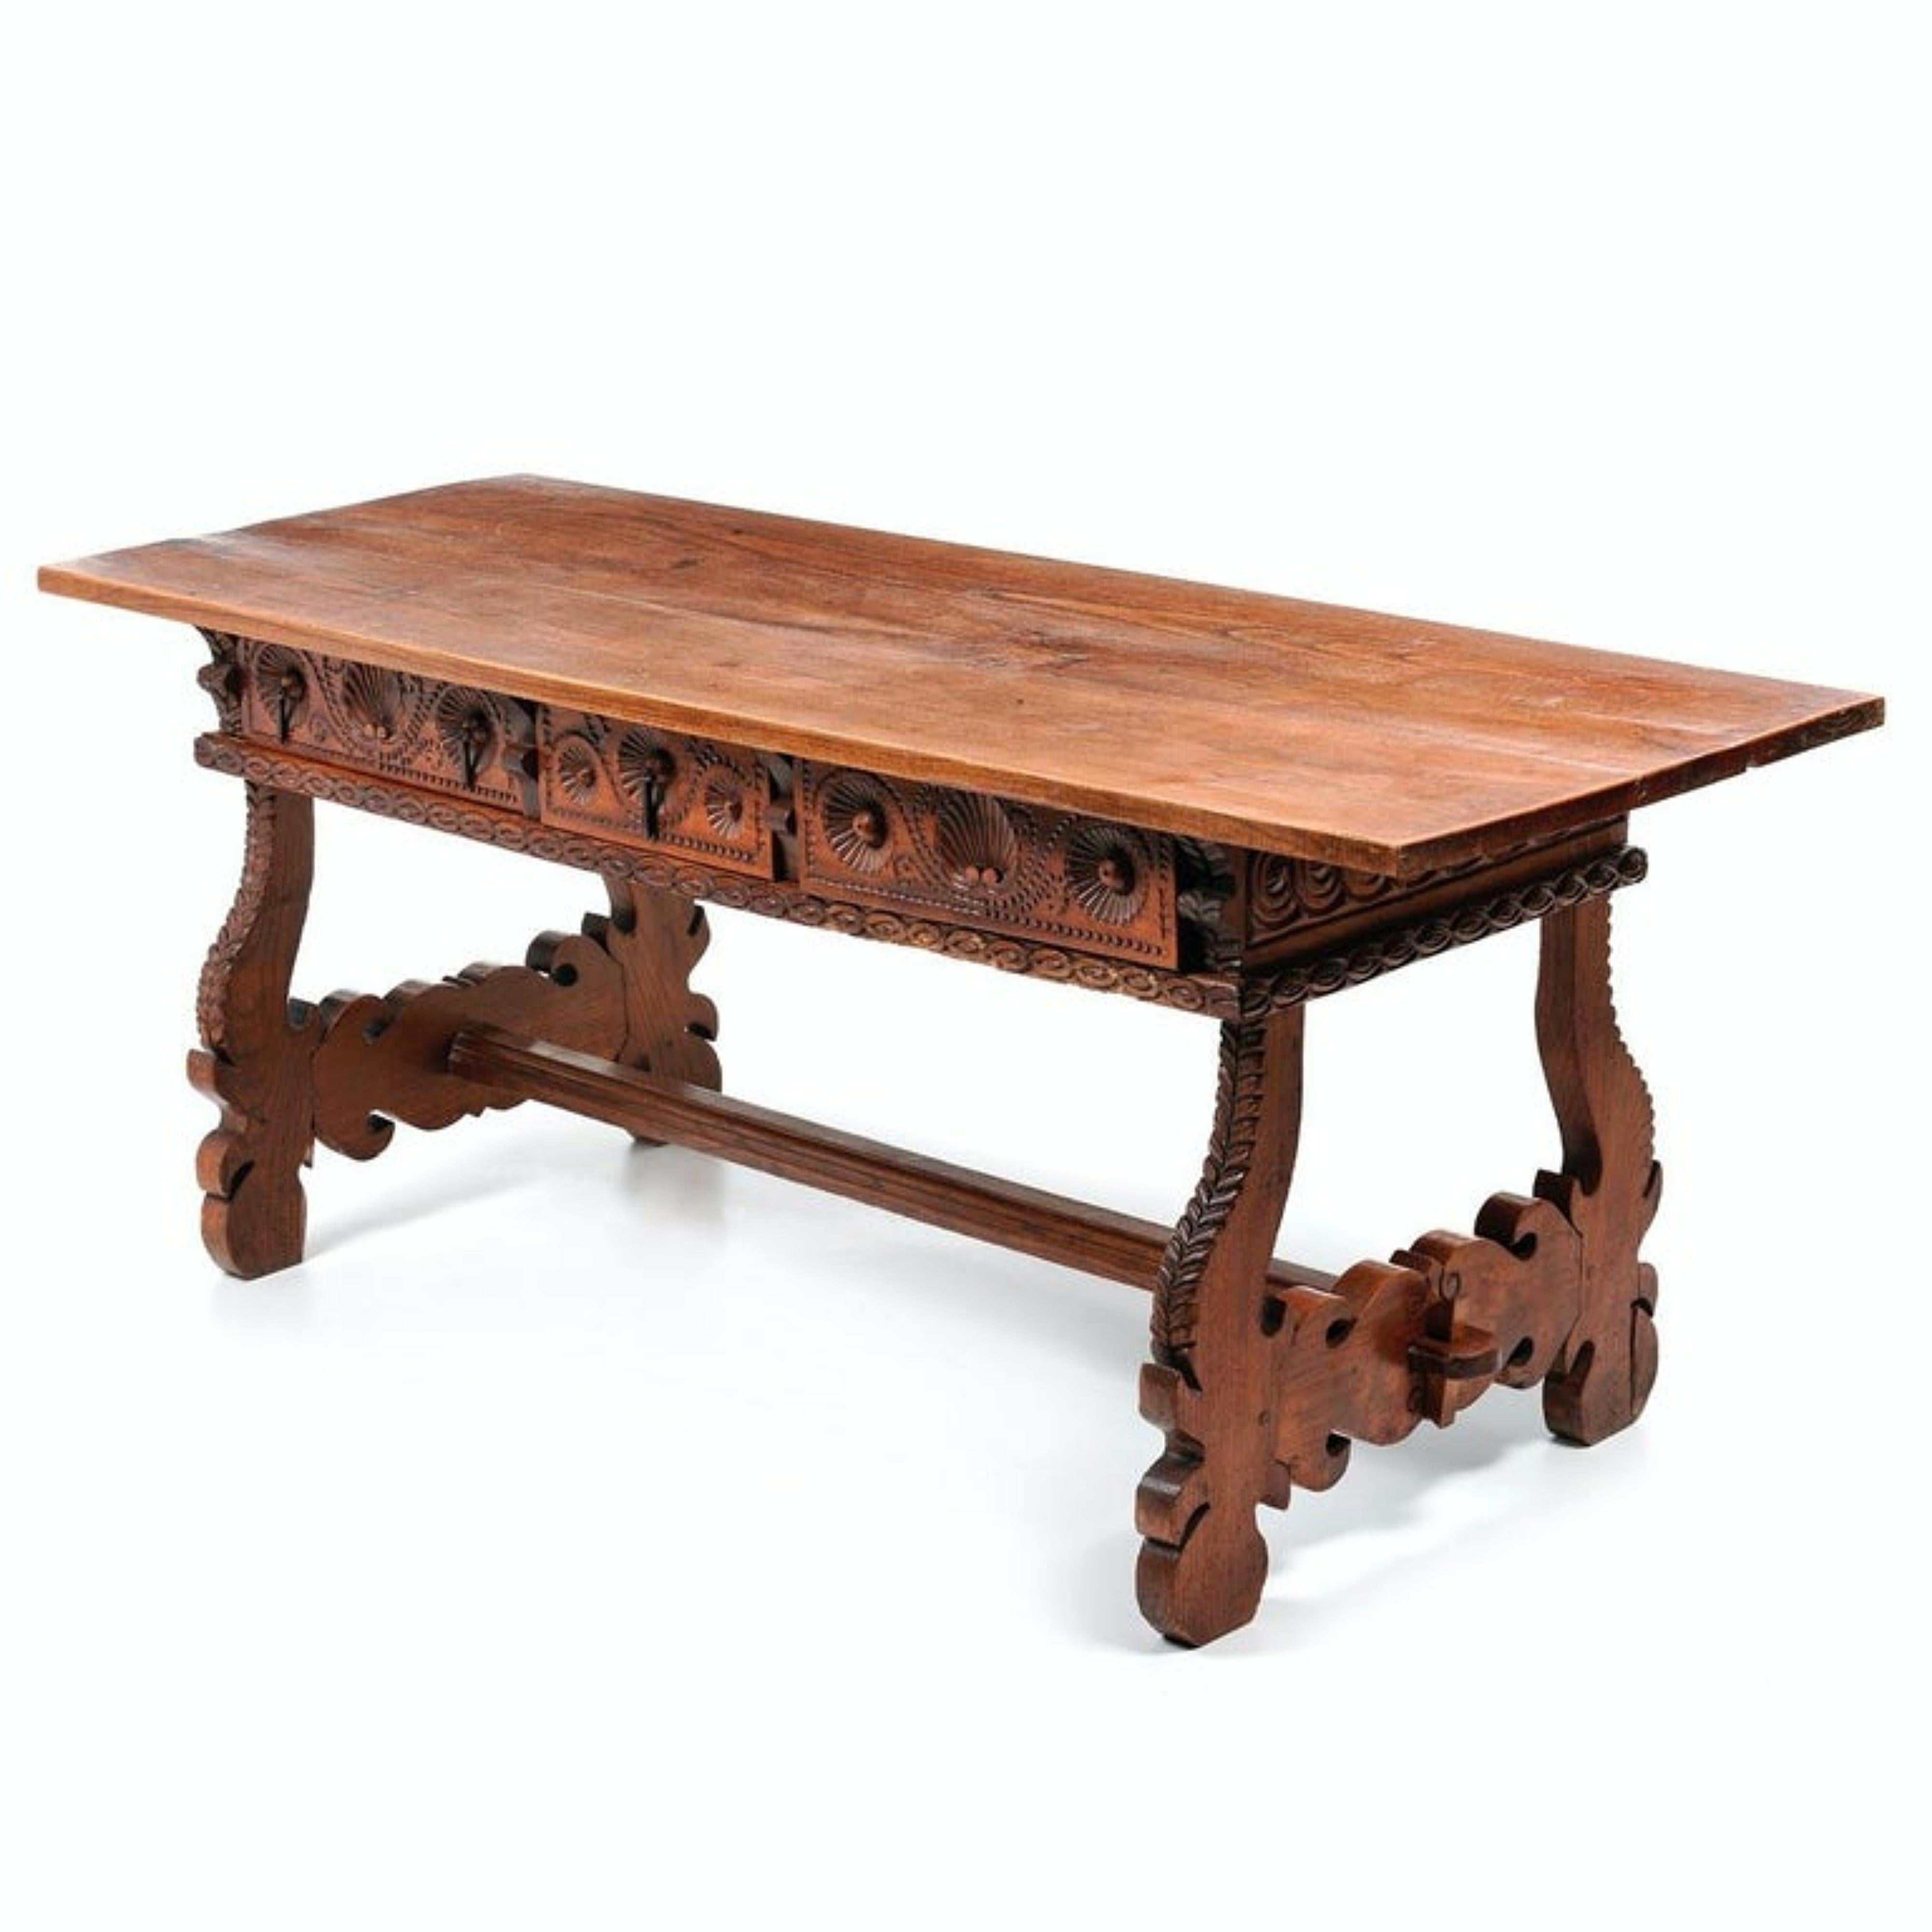 Hand-Crafted Portuguese Rustic Table 18th Century For Sale